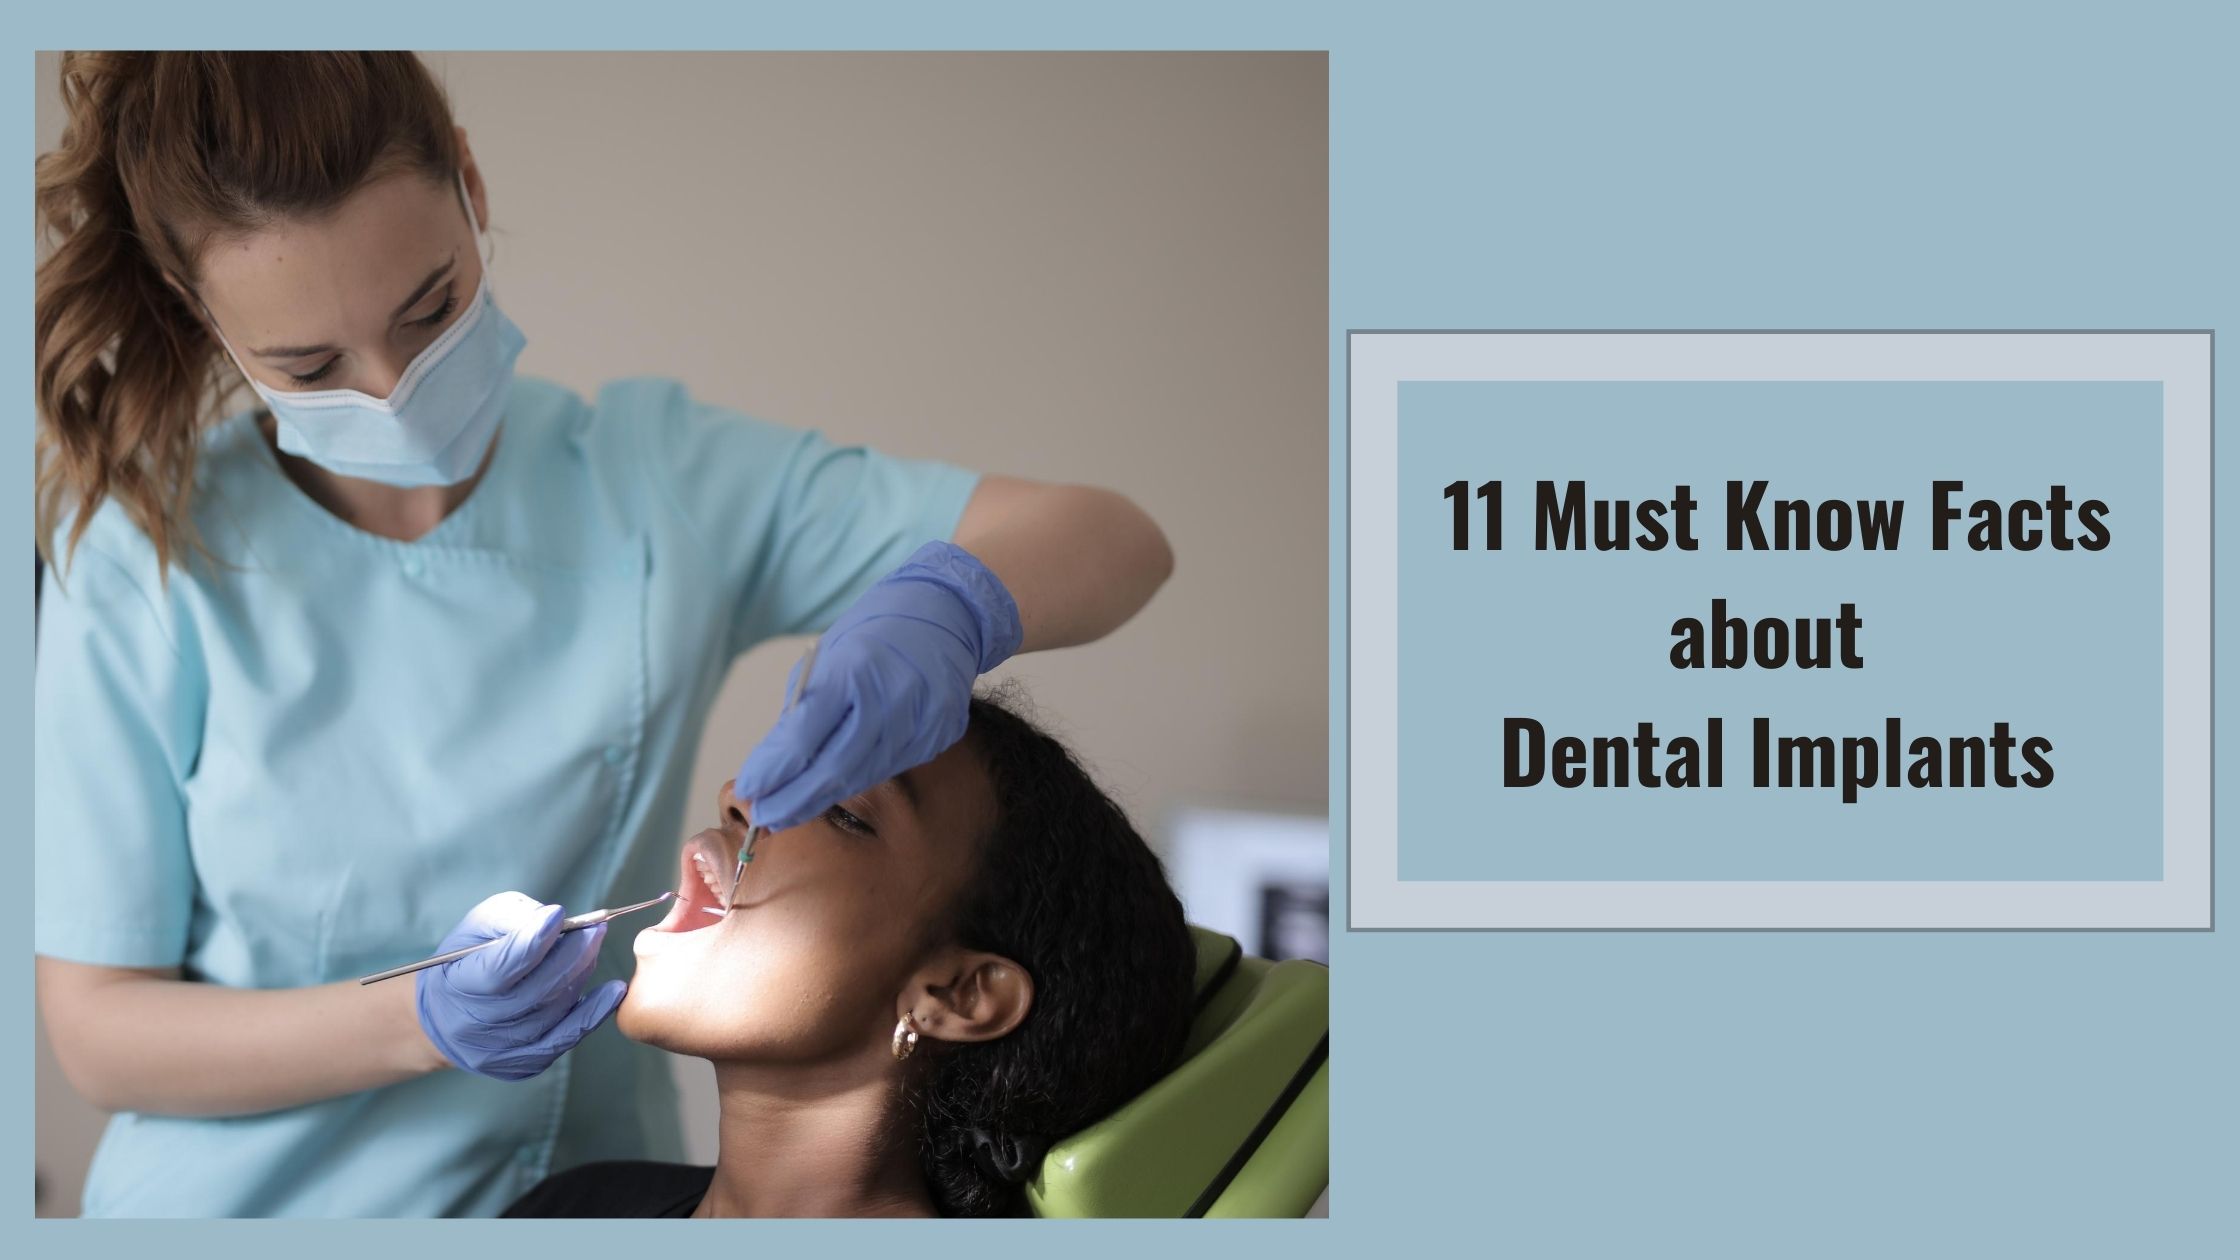 11 must know facts about dental implants 2